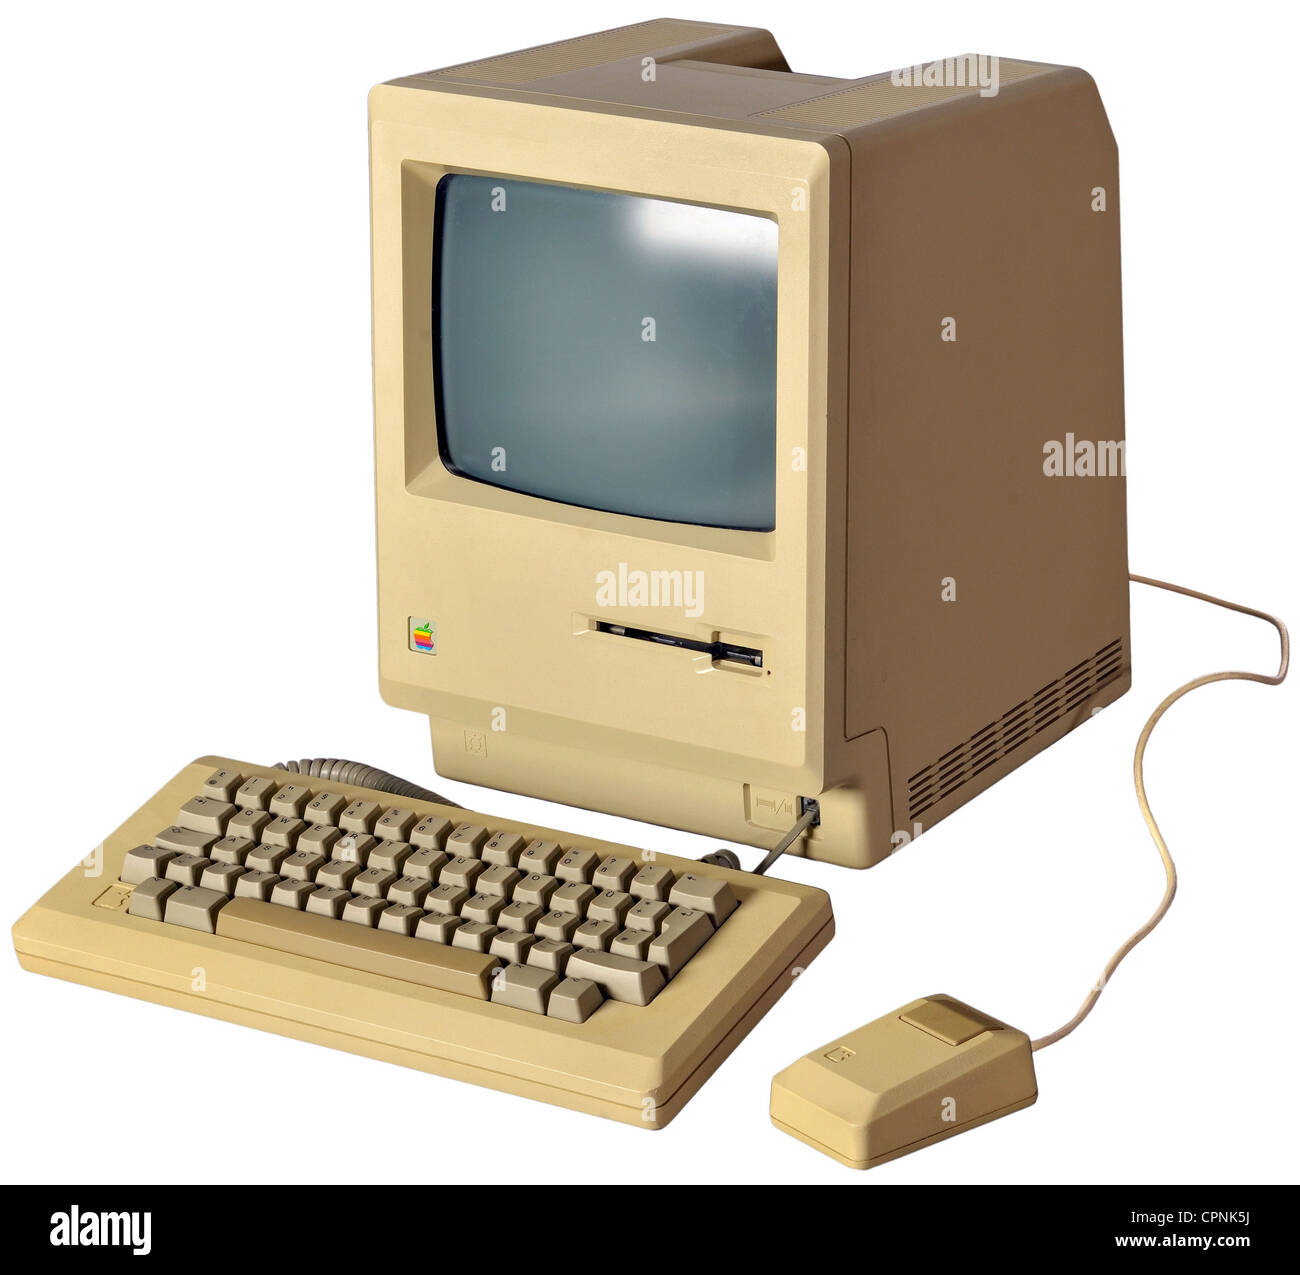 computing / electronics,computer,Apple Macintosh Plus,personal computer,1 MB RAM,8 MHz,with integrated s/w-Monitor and 3.5-inch floppy disk drive,keyboard,mouse,original price 1986: 2.600 dollar,produced until October 1990,follow-up model of the legendary Mac,USA,1986,design classics,design,history of computer,1980s,80s,clipping,cut out,cut-out,cut-outs,invention,inventions,EDP,IT,megabyte,megabytes,keyboards,computer mouse,clicker,mice,mouses,electronic data processing,technics,technologies,electronic brain,electronic data,Additional-Rights-Clearences-Not Available Stock Photo